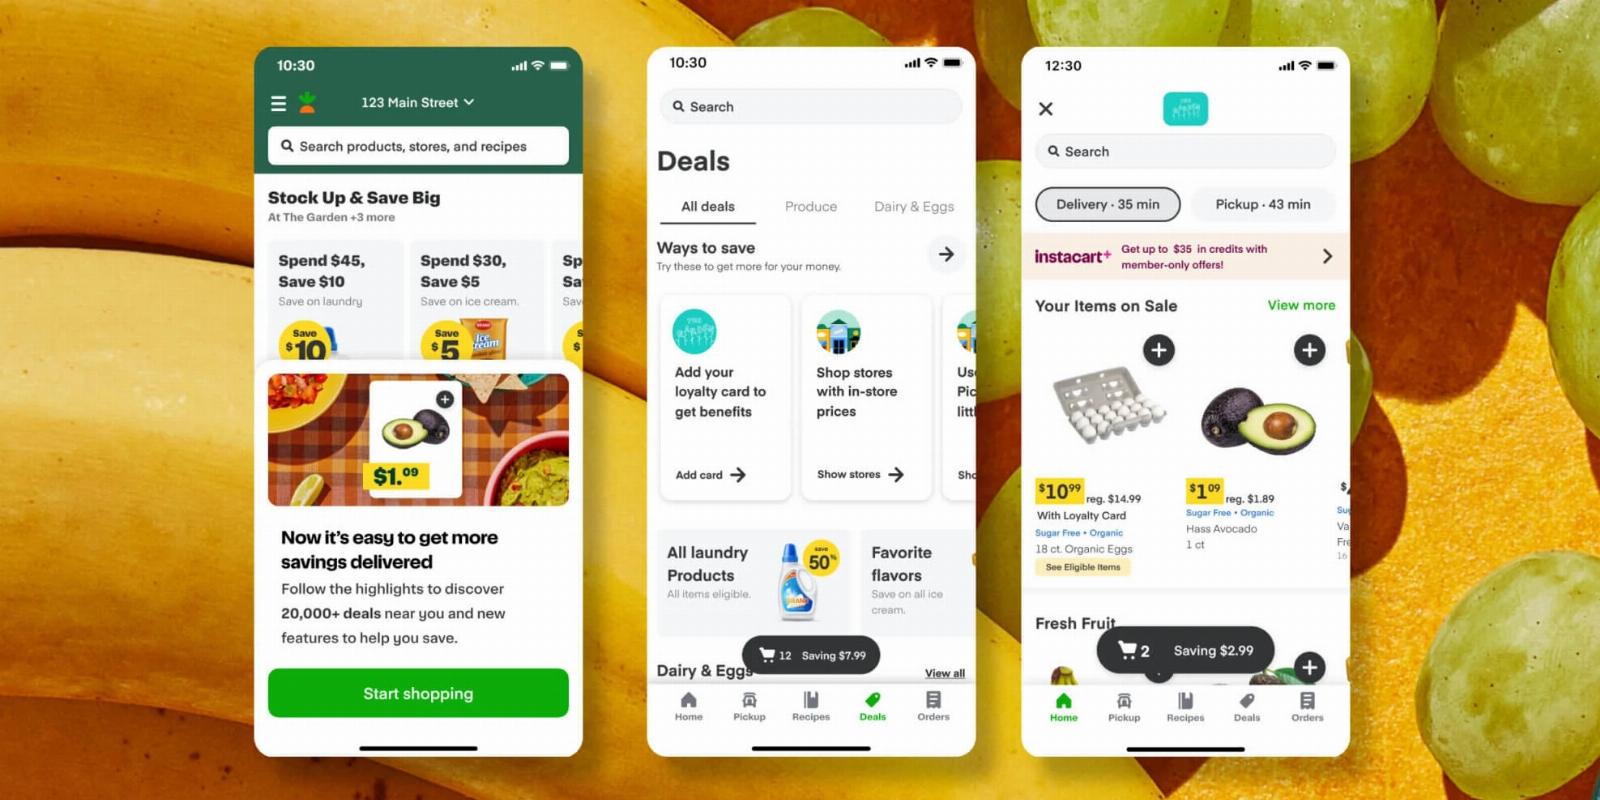 Instacart rolls out new ways for users to find deals on its app